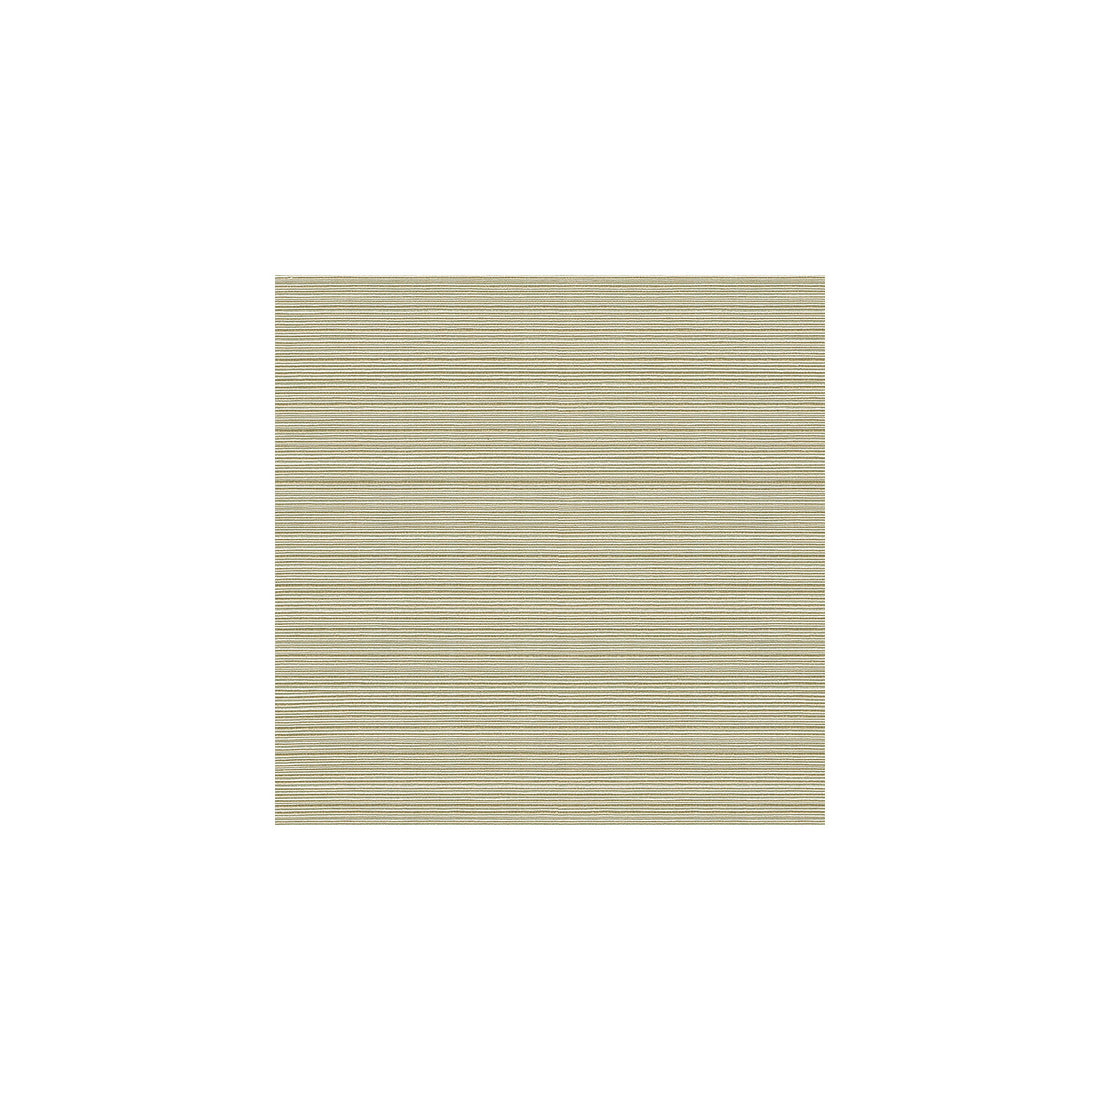 Campania fabric in dove color - pattern 32497.16.0 - by Kravet Basics